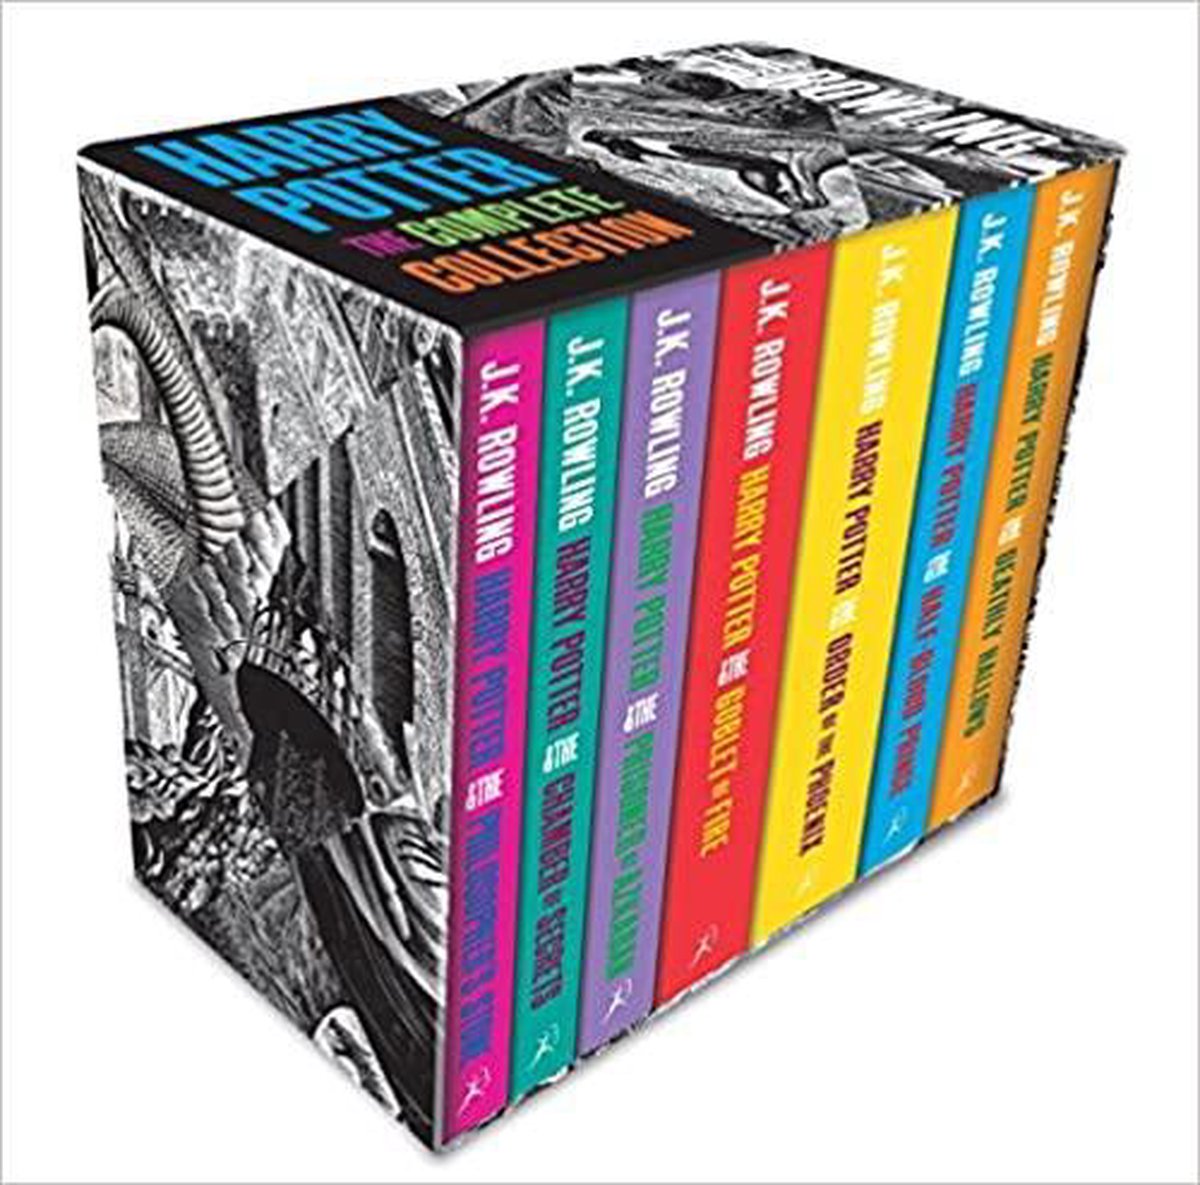 binnenkomst sectie wees gegroet Harry Potter Boxed Set: The Complete Collection (Adult Paperback), J.K.  Rowling |... | bol.com